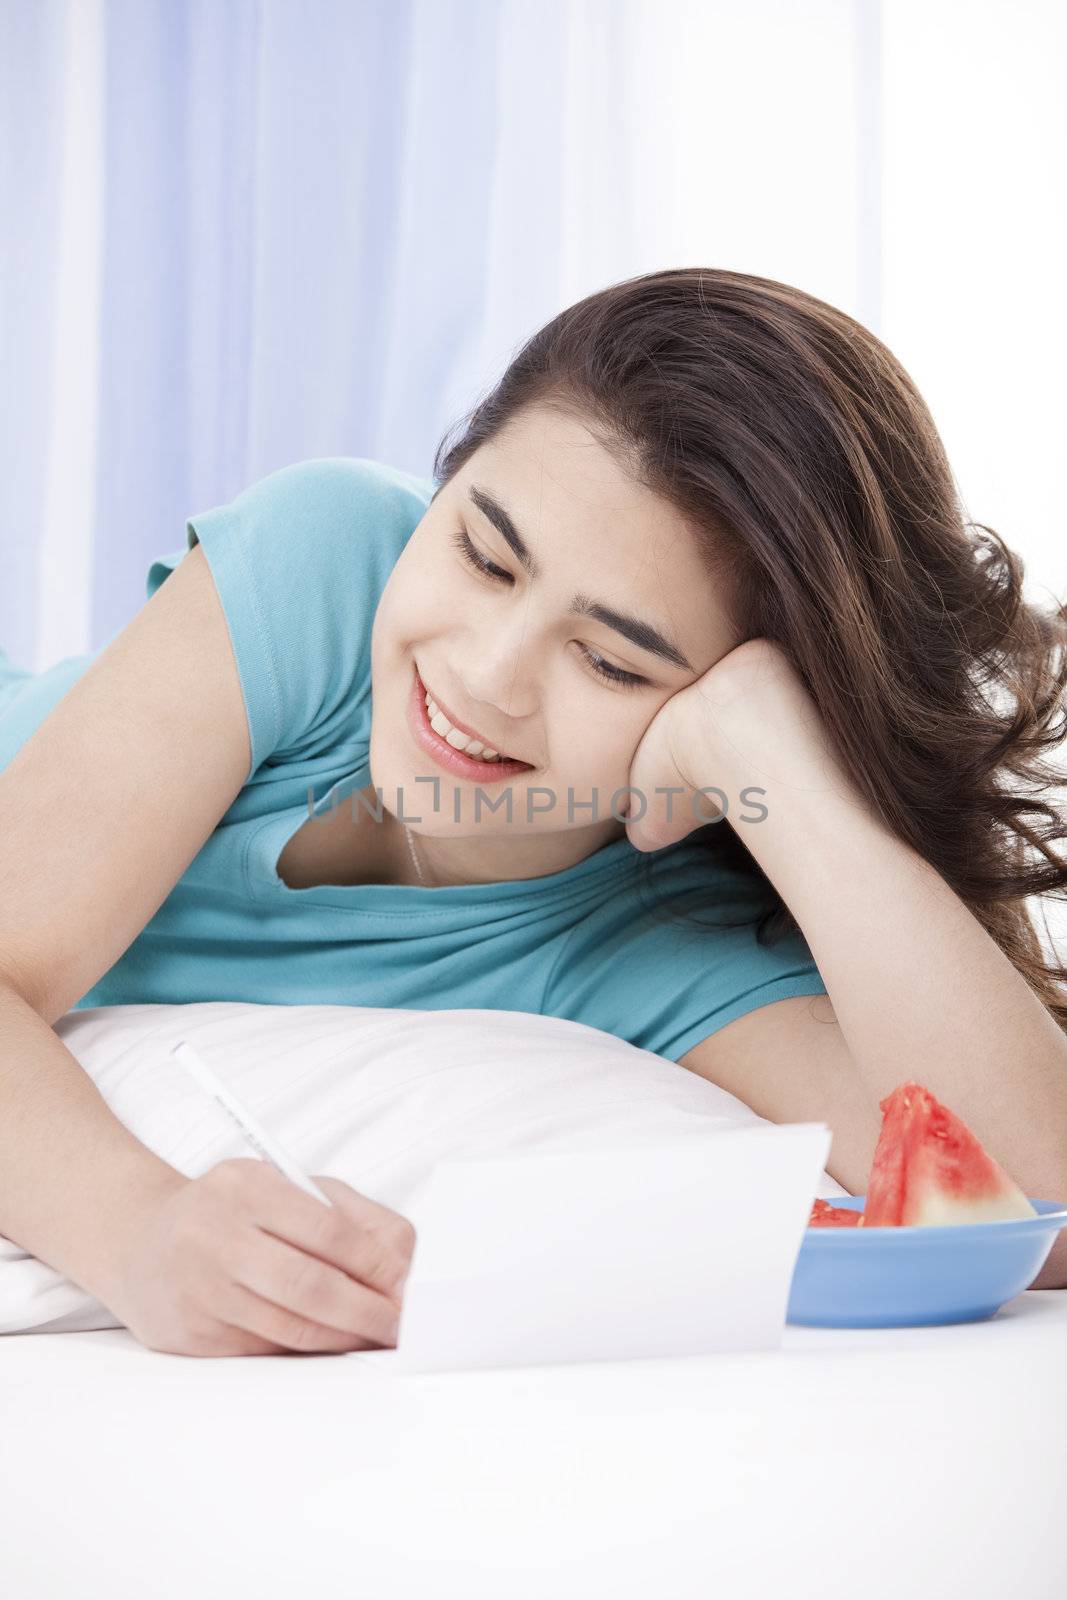 Relaxed and happy biracial teen girl or young woman lying on floor pillow writing a letter or note.